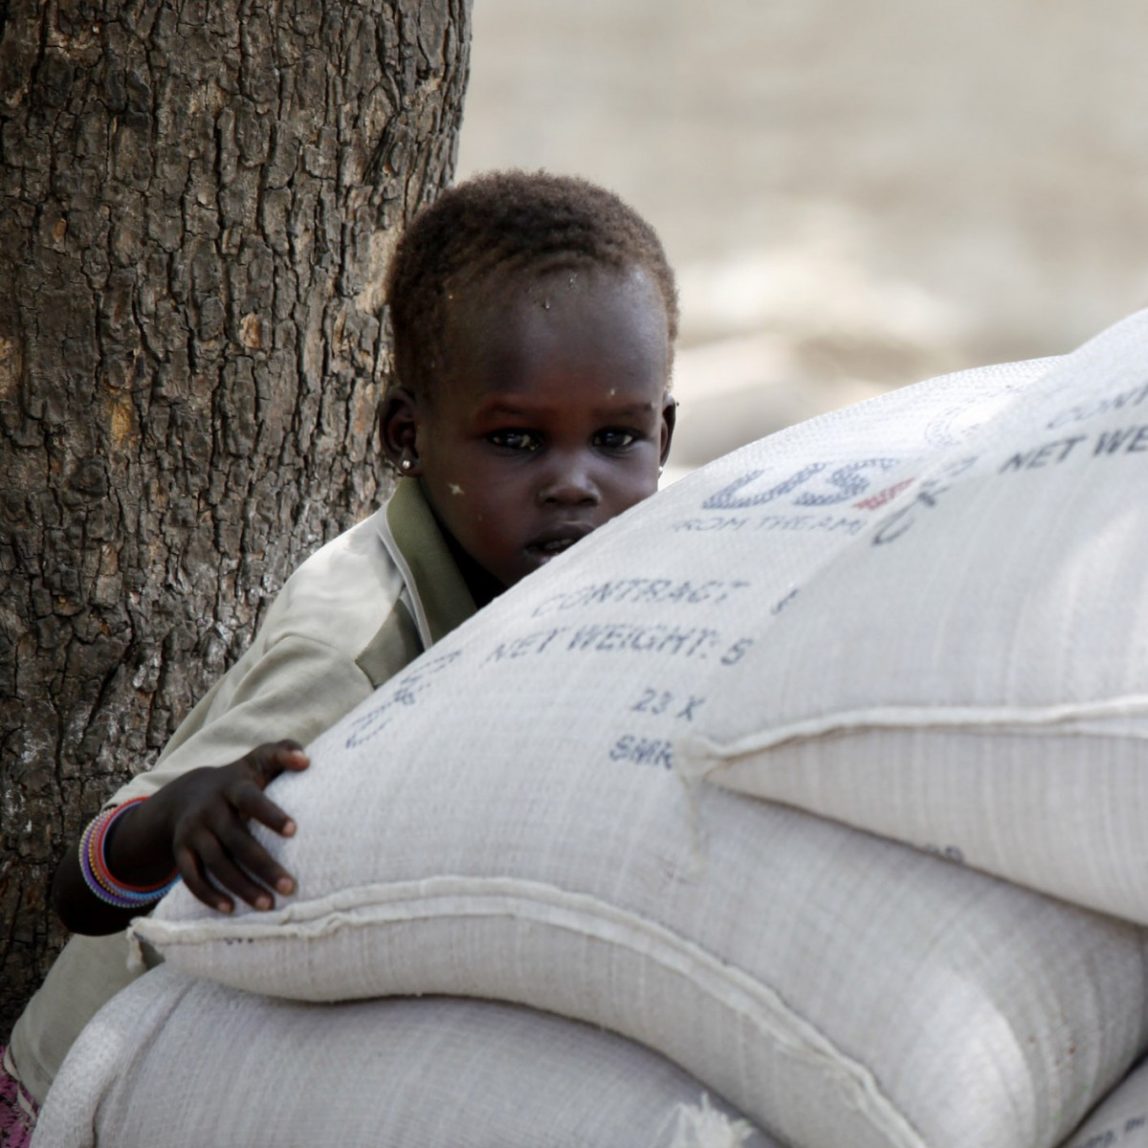 A young Sudanese girl grabs onto one of 60 bags of sorghum for sale donated by USAID and distributed by the World Food Program in Akobo, southern Sudan, Thursday April 8, 2010. (AP Photo/Jerome Delay)